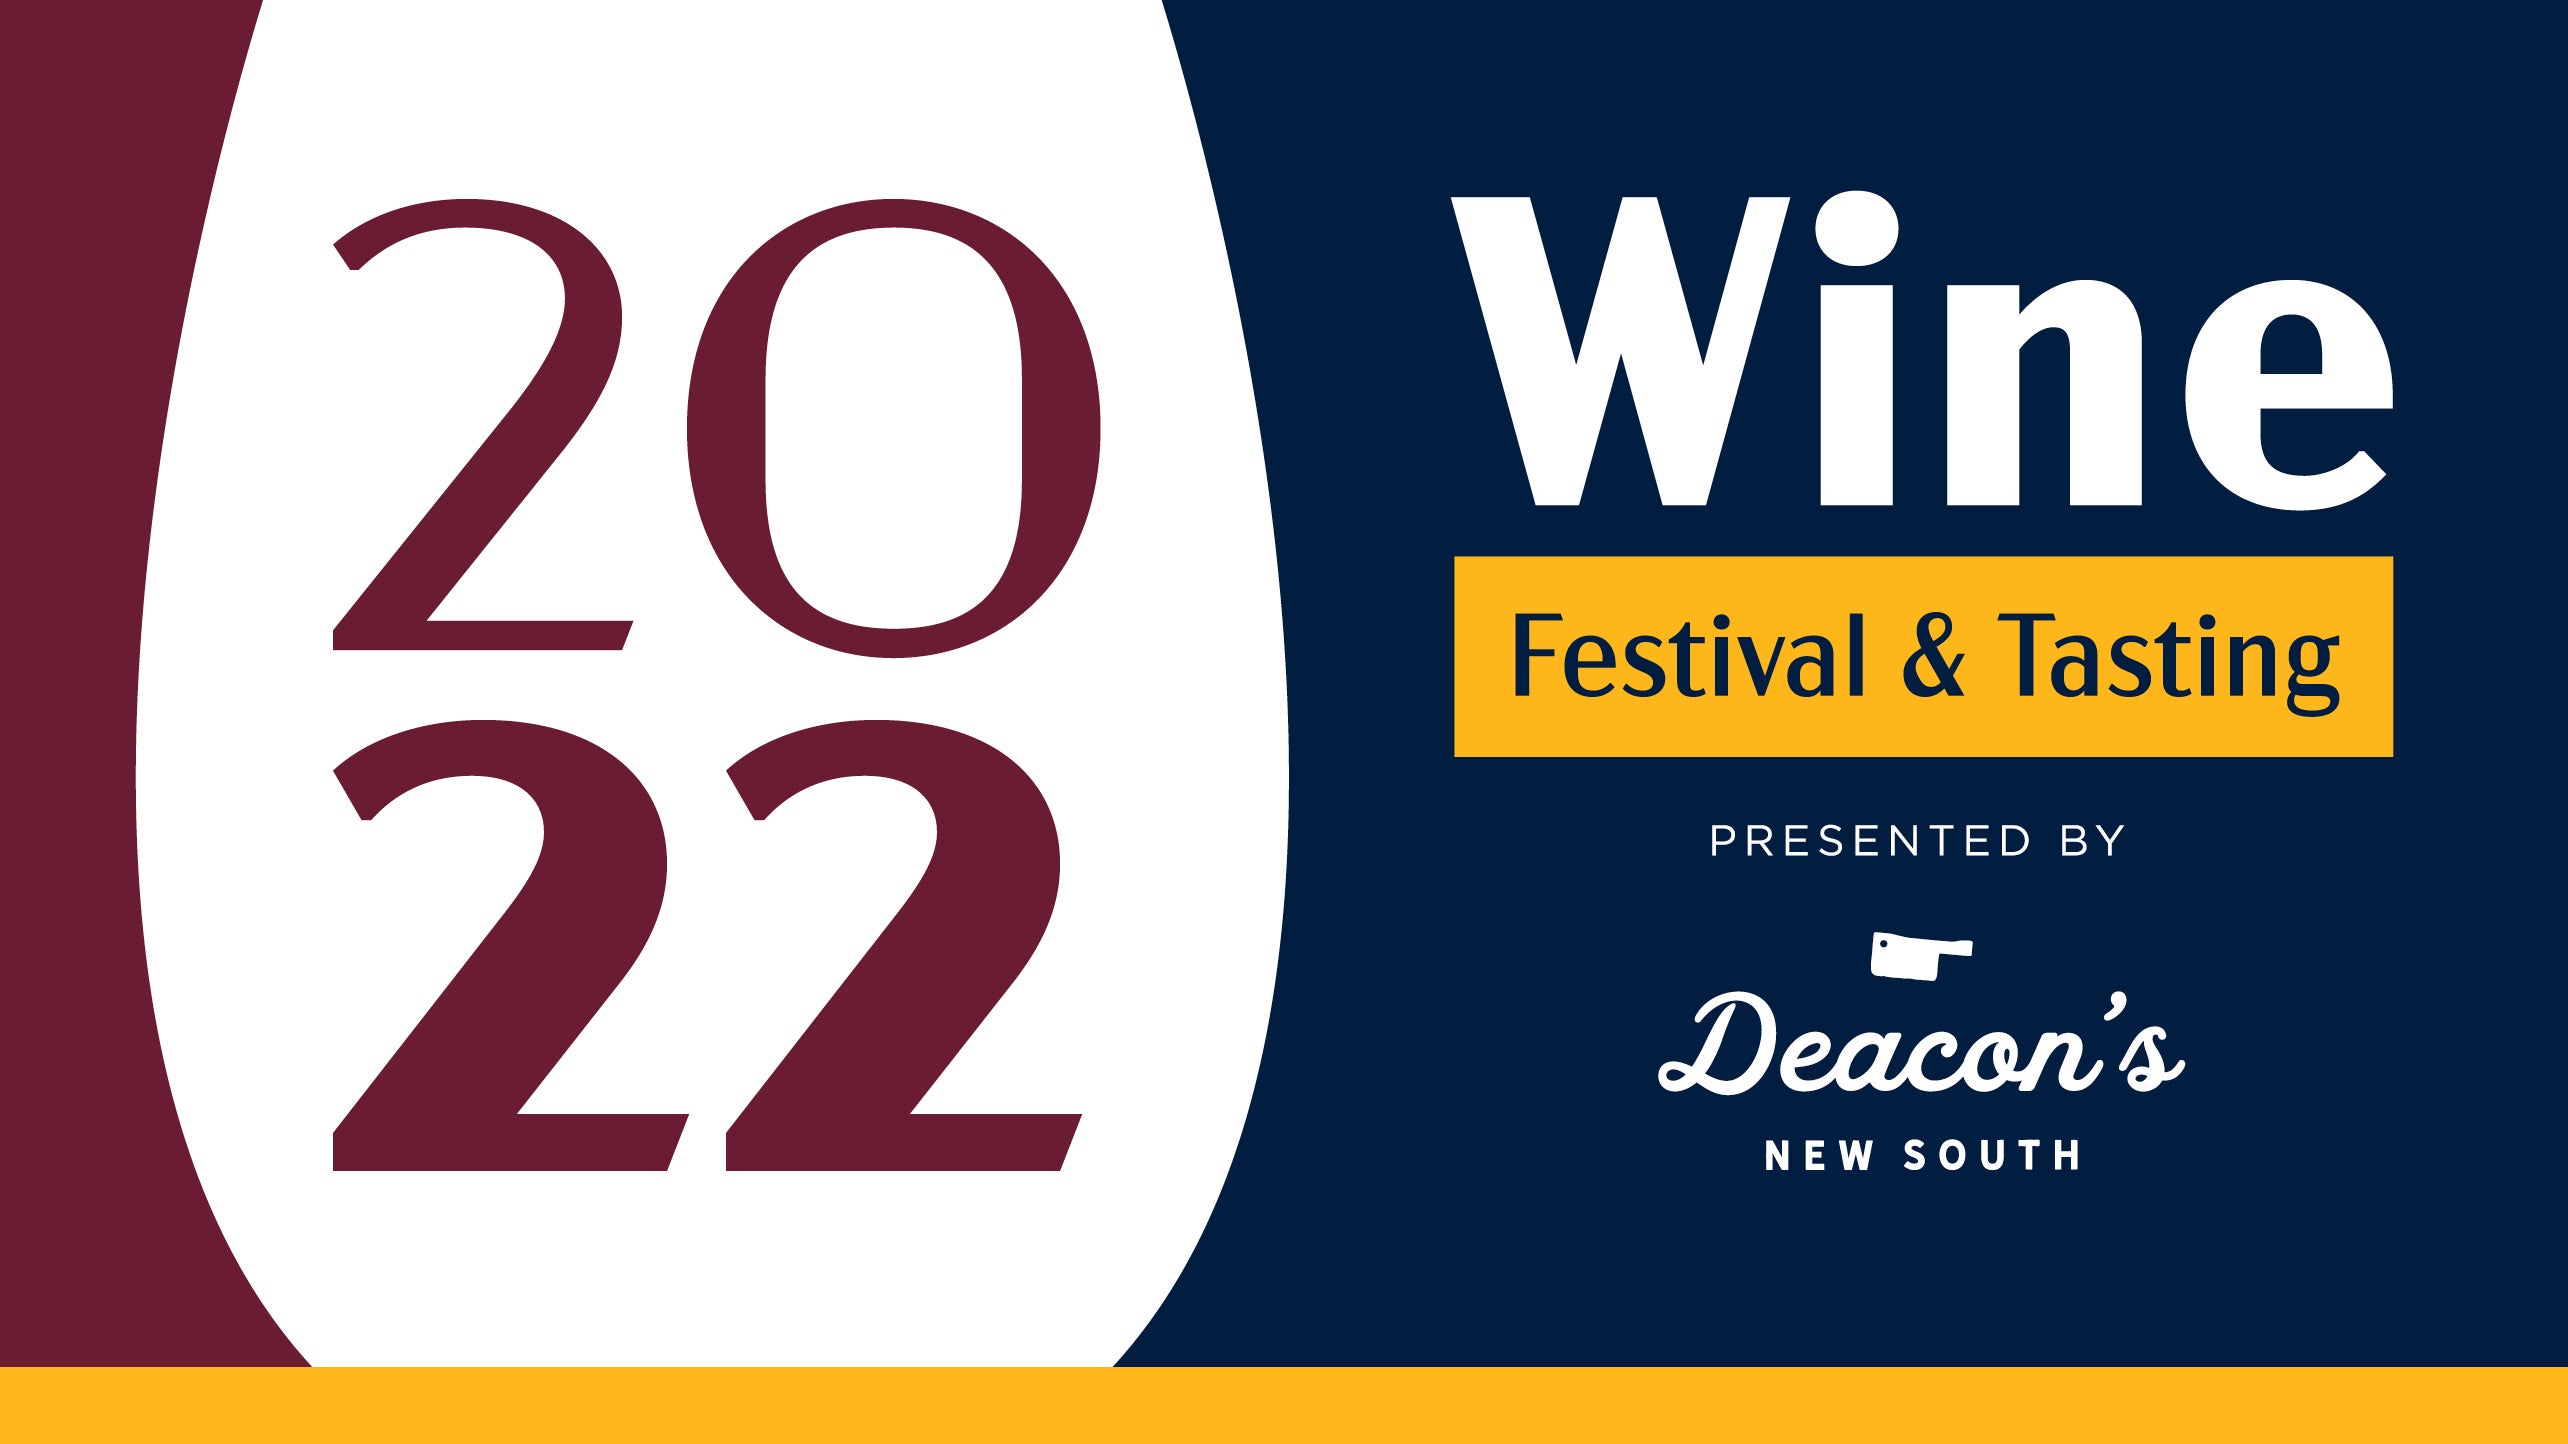 2022 Wine Festival and Tasting Presented by Deacon's New South